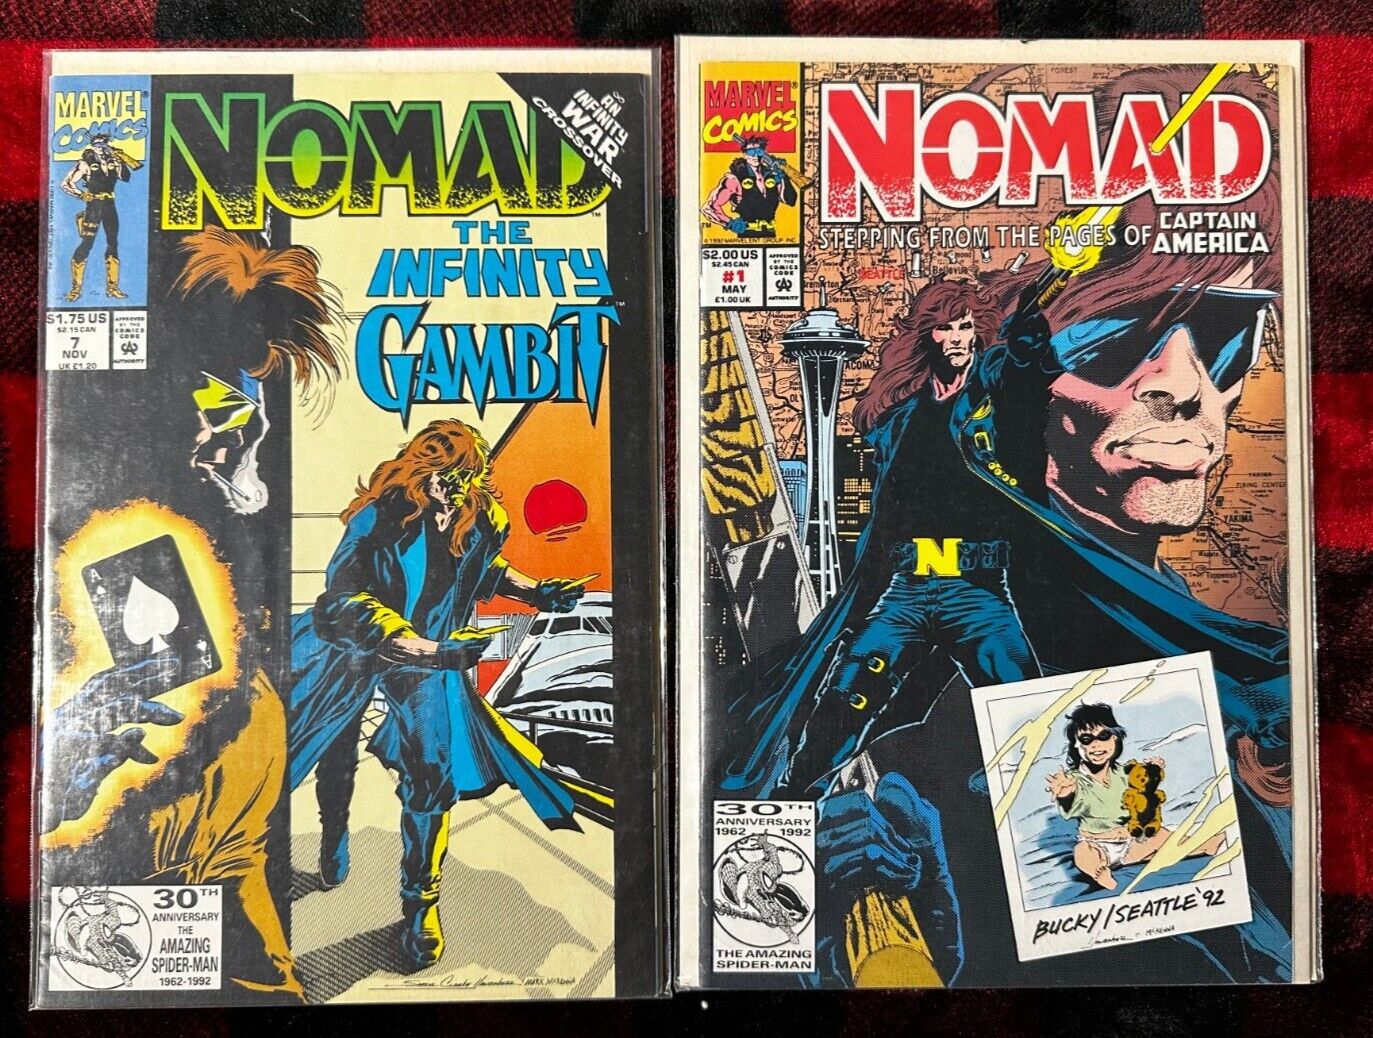 Nomad #1 Marvel Comics KEY W/ #7 Capt. America Bagged and Boarded